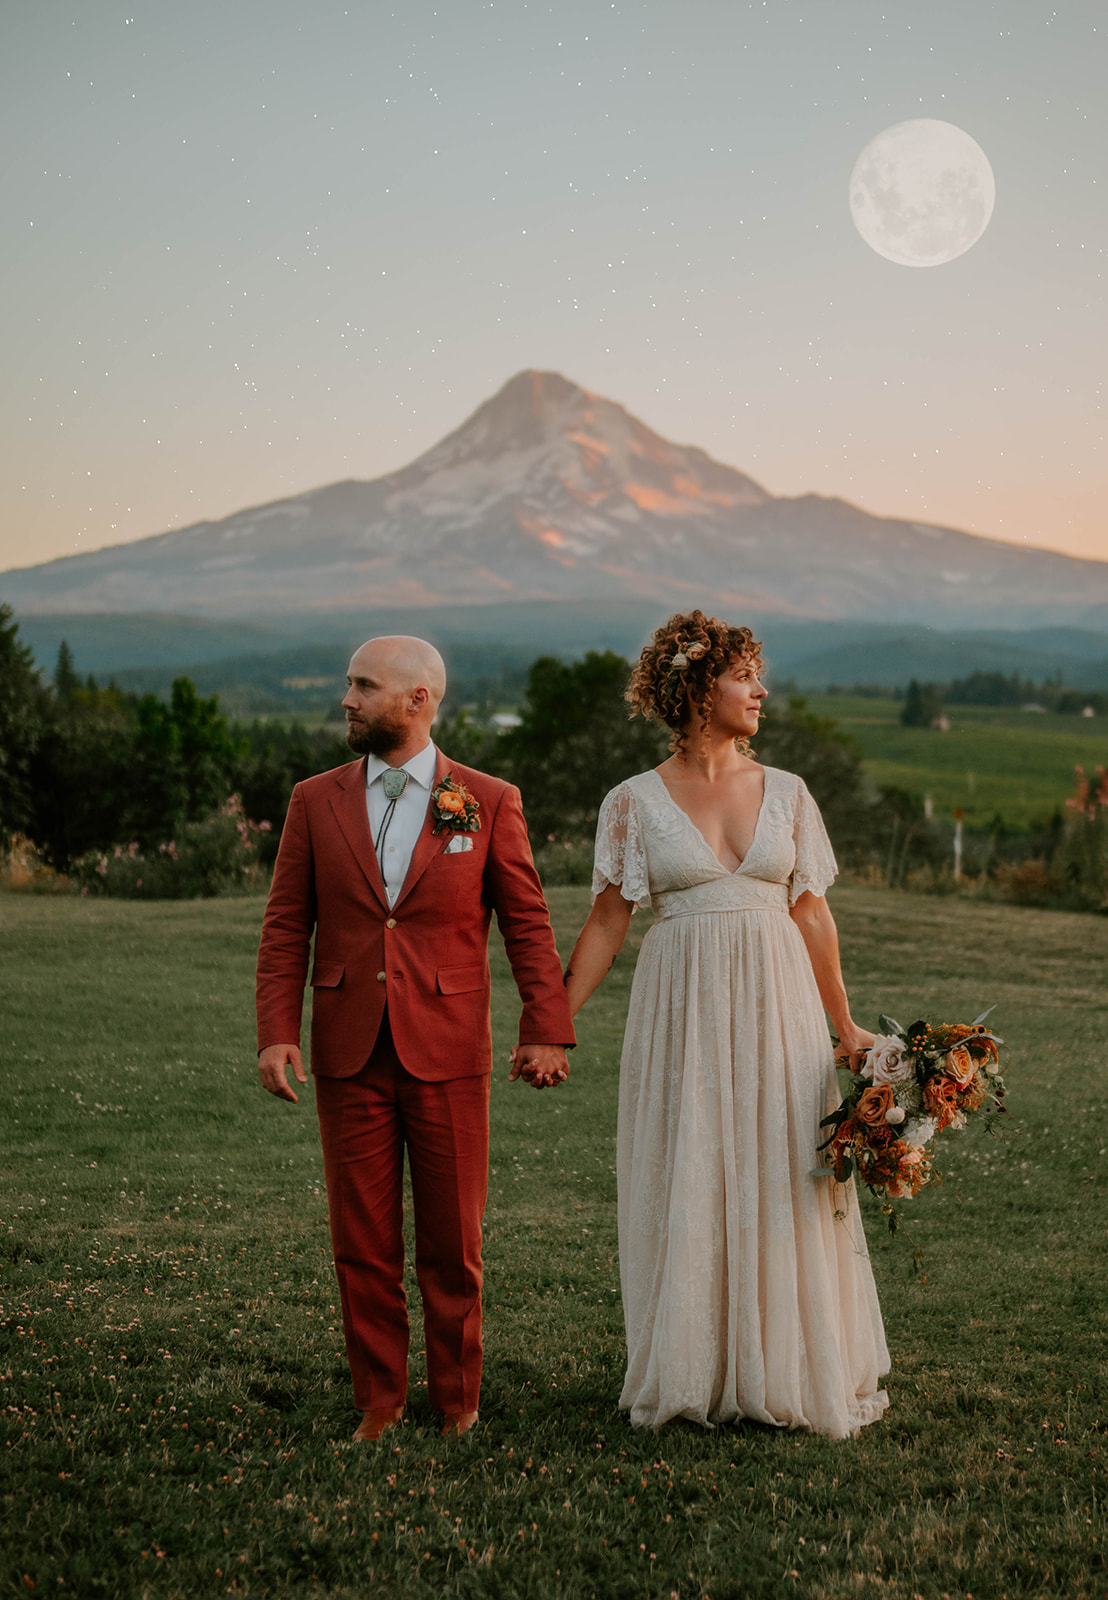 bride and groom with mt. hood and moon